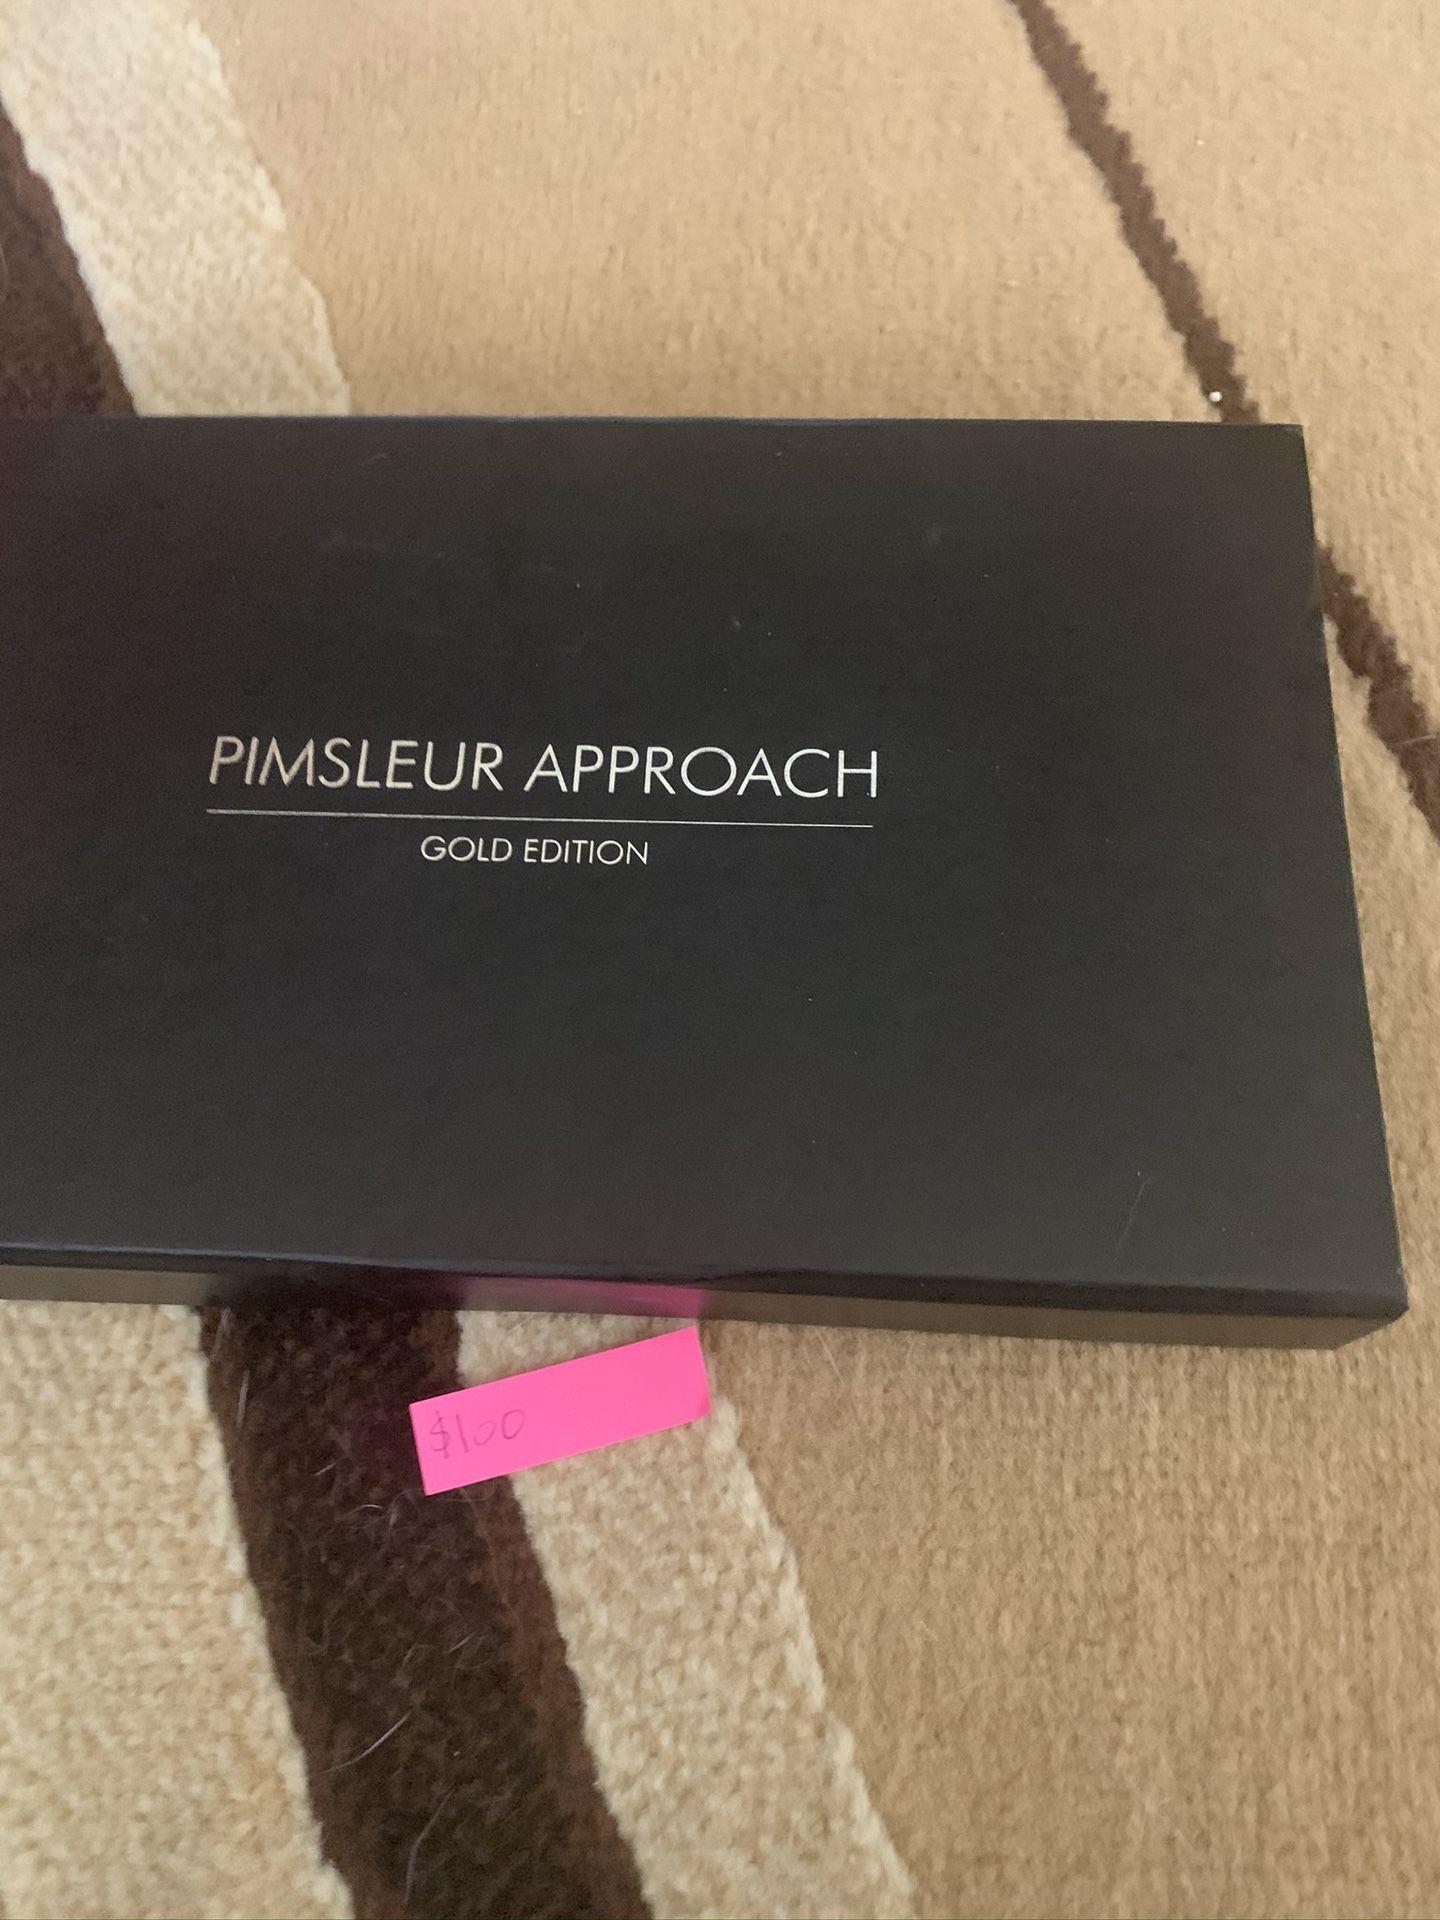 Pimsleur approach language learning gold edition